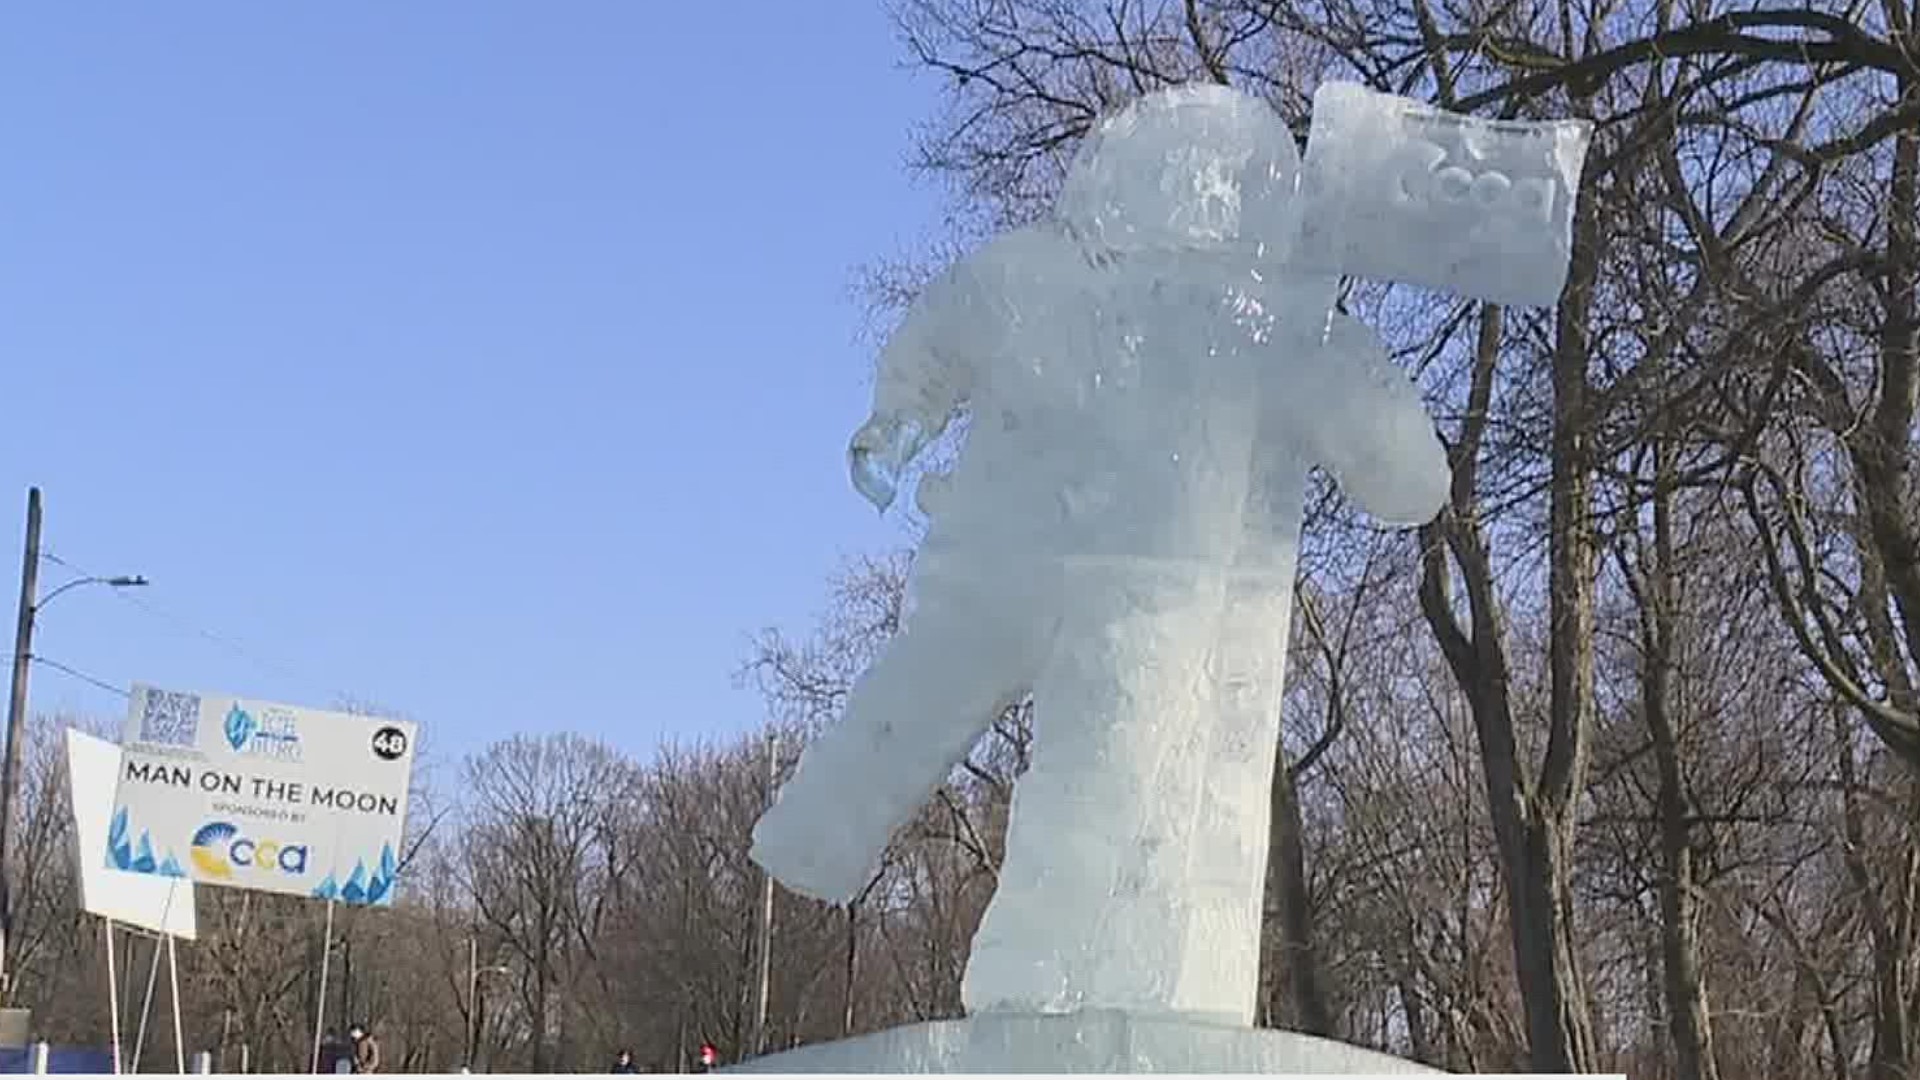 Harrisburg's Ice & Fire festival is coming up! Here's what to expect